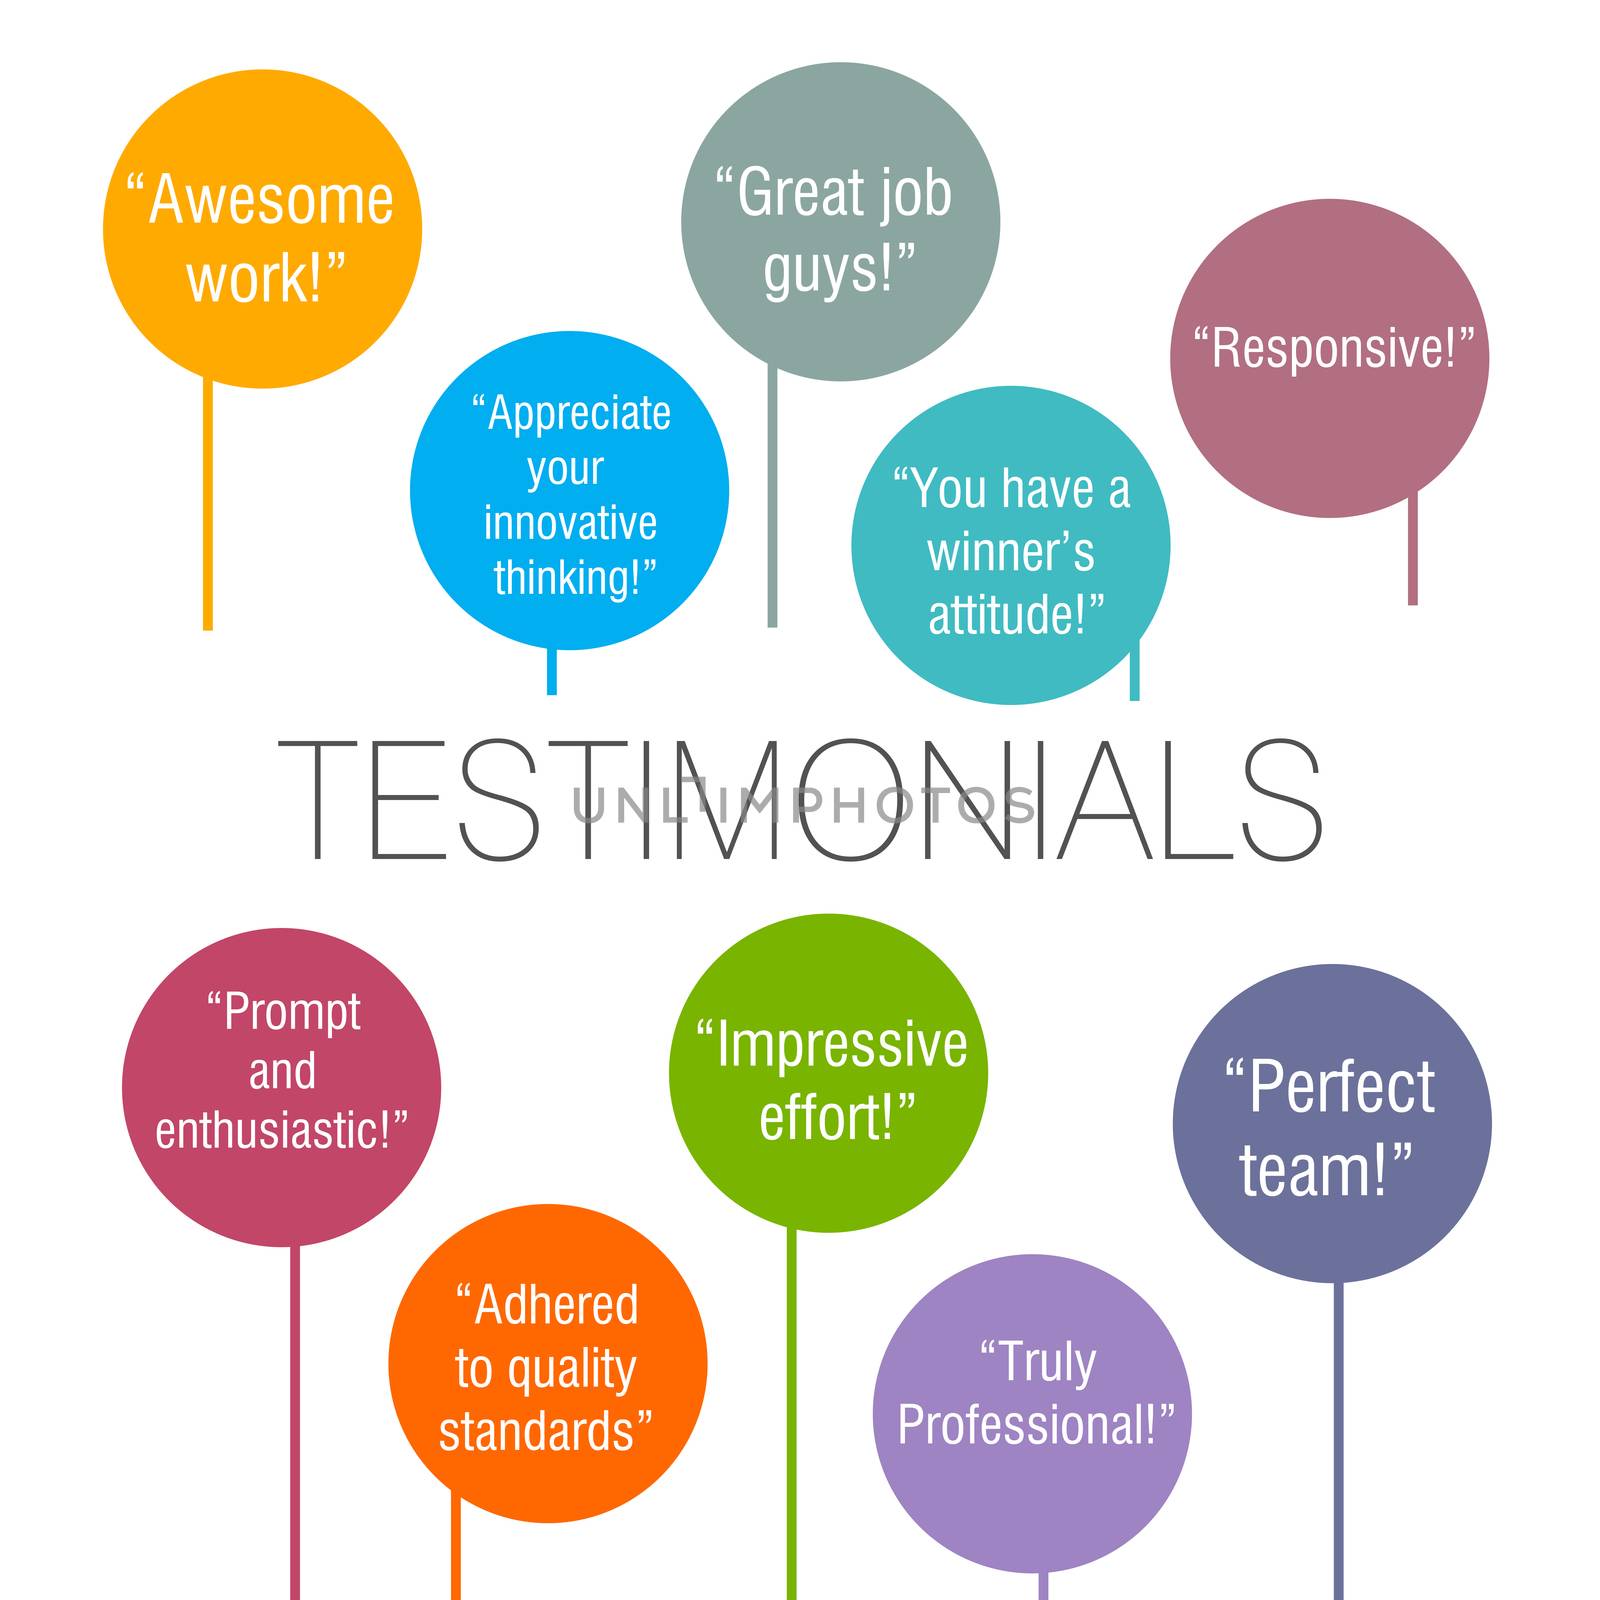 Generic testimonials from various clients displayed on a colorful background